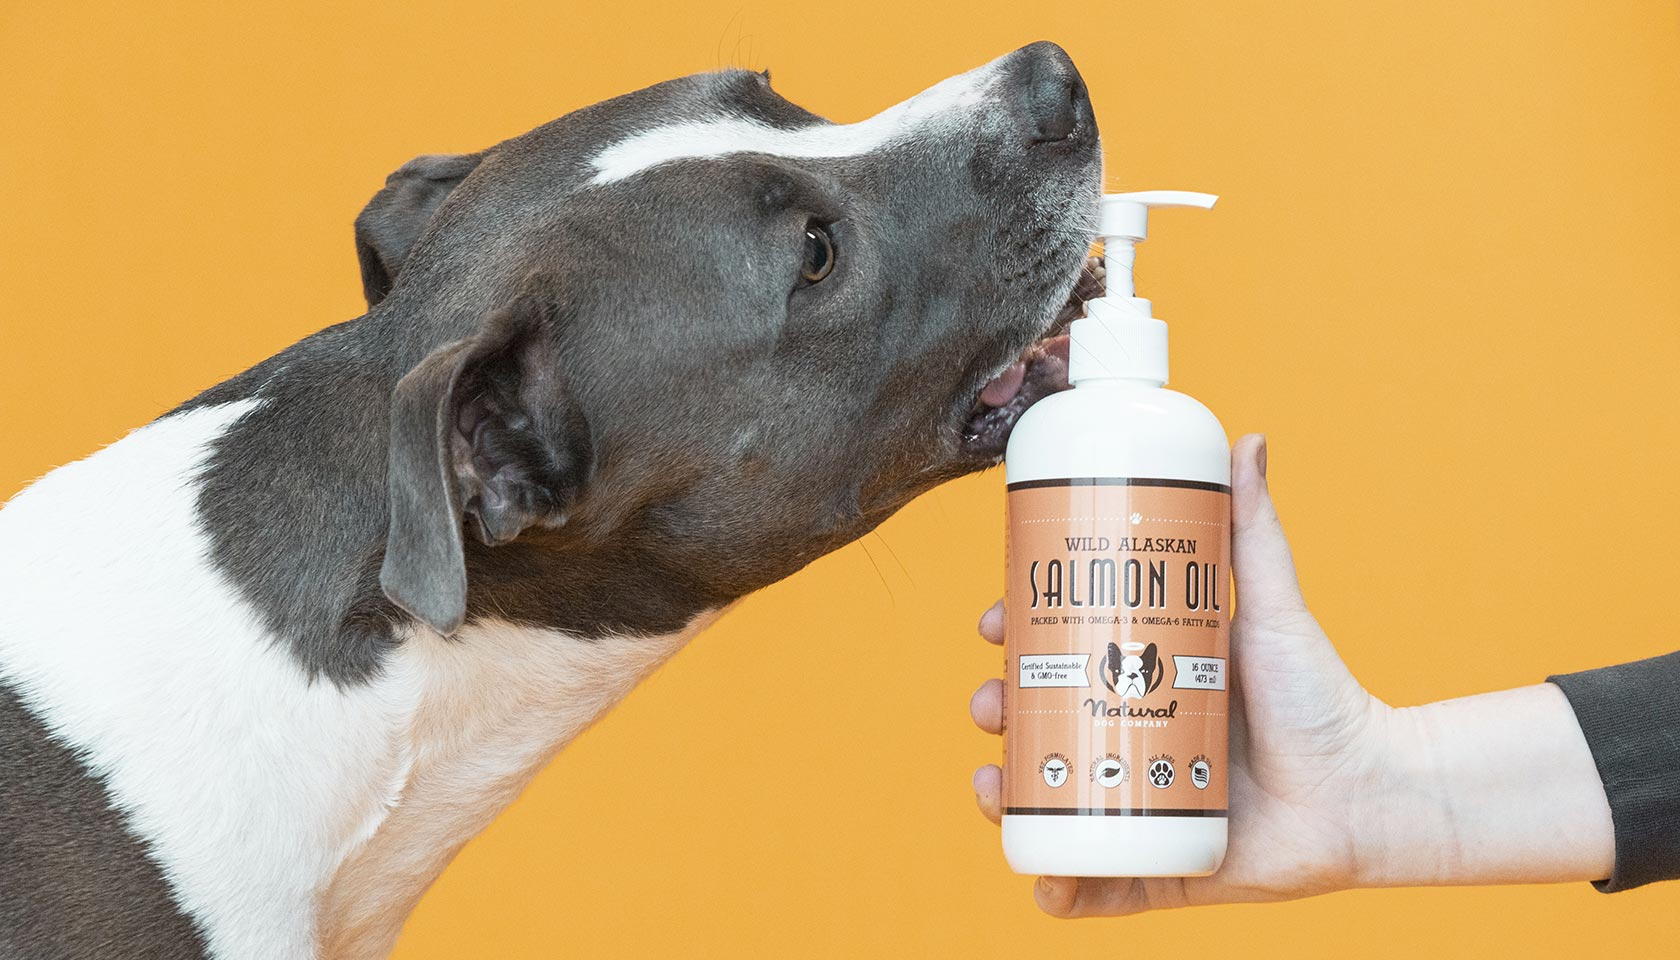 Blue and white pit bull dog licking bottle of salmon oil, which helps with pit bull skin issues